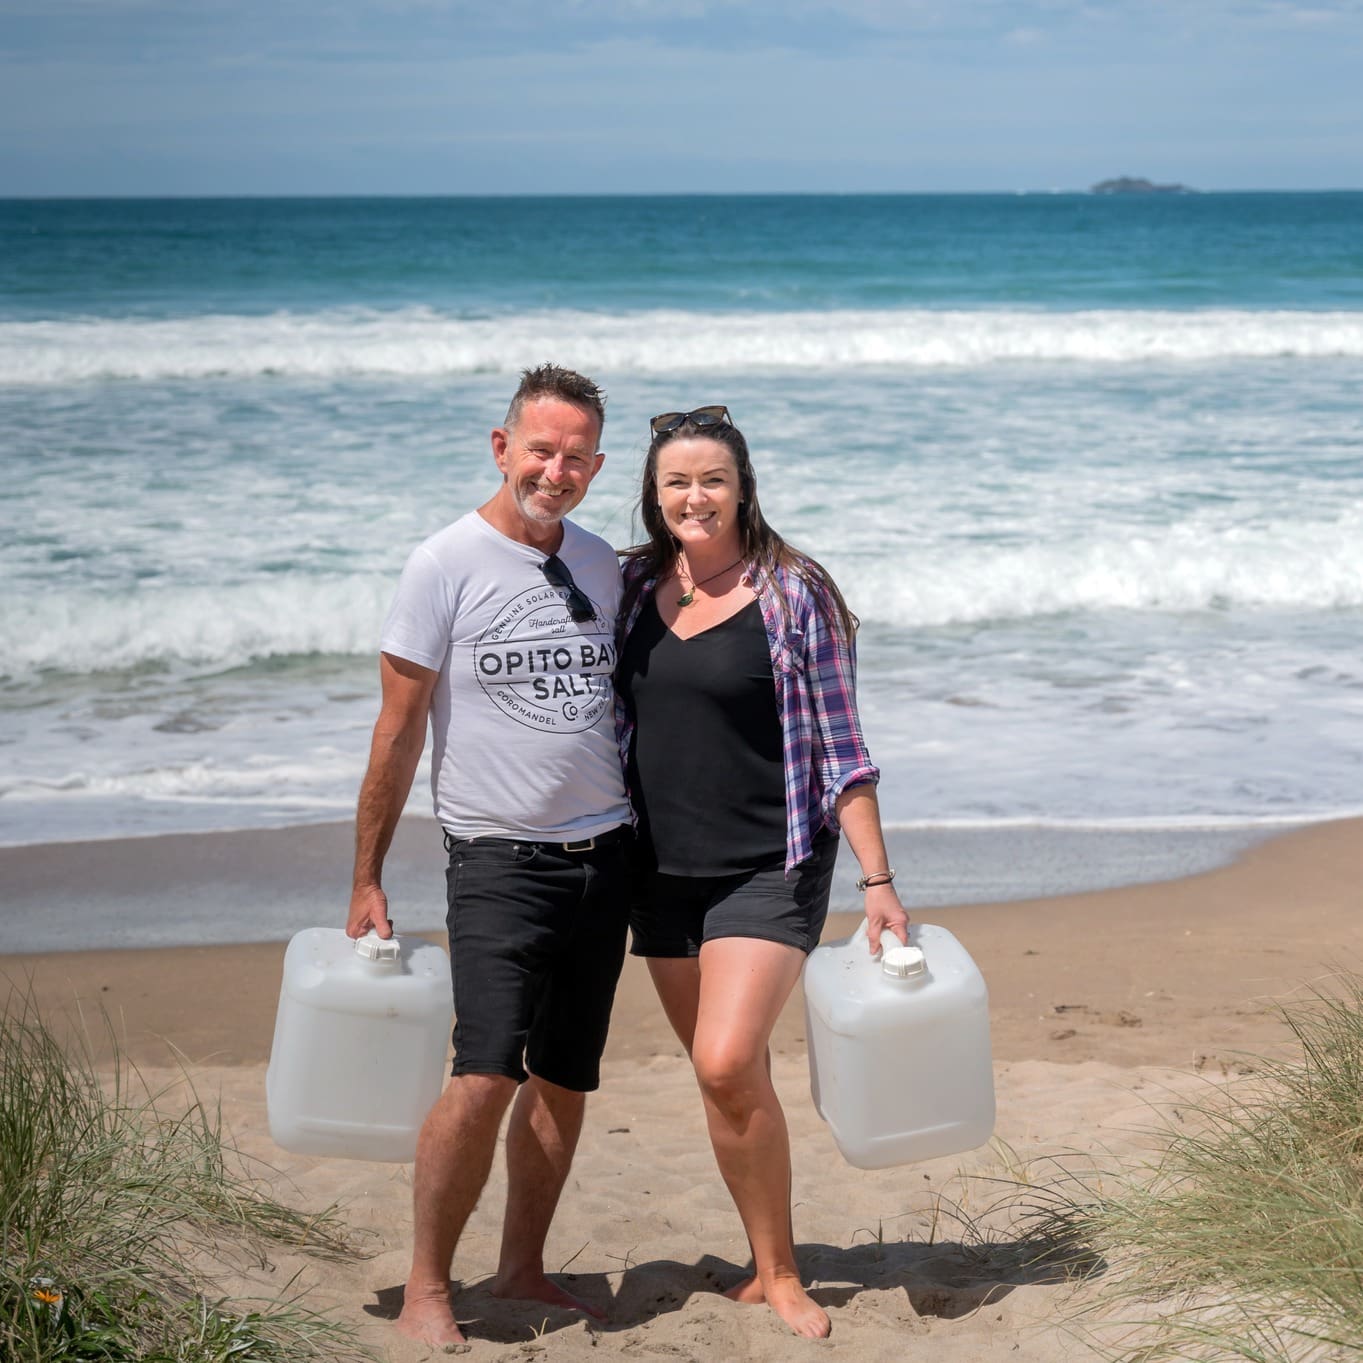 Meet the team!  Let’s meet Erin and Perry - founders of @opitobaysaltco! The remote, wild, and crystal blue waters of Opito Bay is a dream come true for the founders and the inspiration behind their award-winning 100% natural solar evaporated artisanal Coromandel Sea Salt  They are converting chefs and everyday cooks with their distinctive sea salt, inspiring new food journeys and encouraging consumers to think about their salt differently.  You can try their delicious salt as part of our Wondoruous Waikato and Food Award Winner boxes ️  “Living and working here has always been part of the dream. The most unexpected part is the amazing people you meet through the foodie ecosystem. From farmers market punters to digital innovators, from food writers to retailers - everyone sharing a passion for NZ food is amazing”  “Food for us is all about flavour, and artisan sea salt is a great way to enhance any dish. Our mission is to bring uniquely flavoursome Coromandel sel marin to NZ customers with sustainability and quality being amongst our core values.”  “Our customers care not only about quality and flavour, but also the provenance of their food.”  “Buying local, even if it costs slightly more, encourages local producers to think more creatively to grow. It is also generally more sustainable and less resource heavy when you buy local, and we know that we can’t take our planet for granted. Lastly, by supporting local, you indirectly create more choice in the market as a successful business, hopefully inspiring more locals to get involved.”